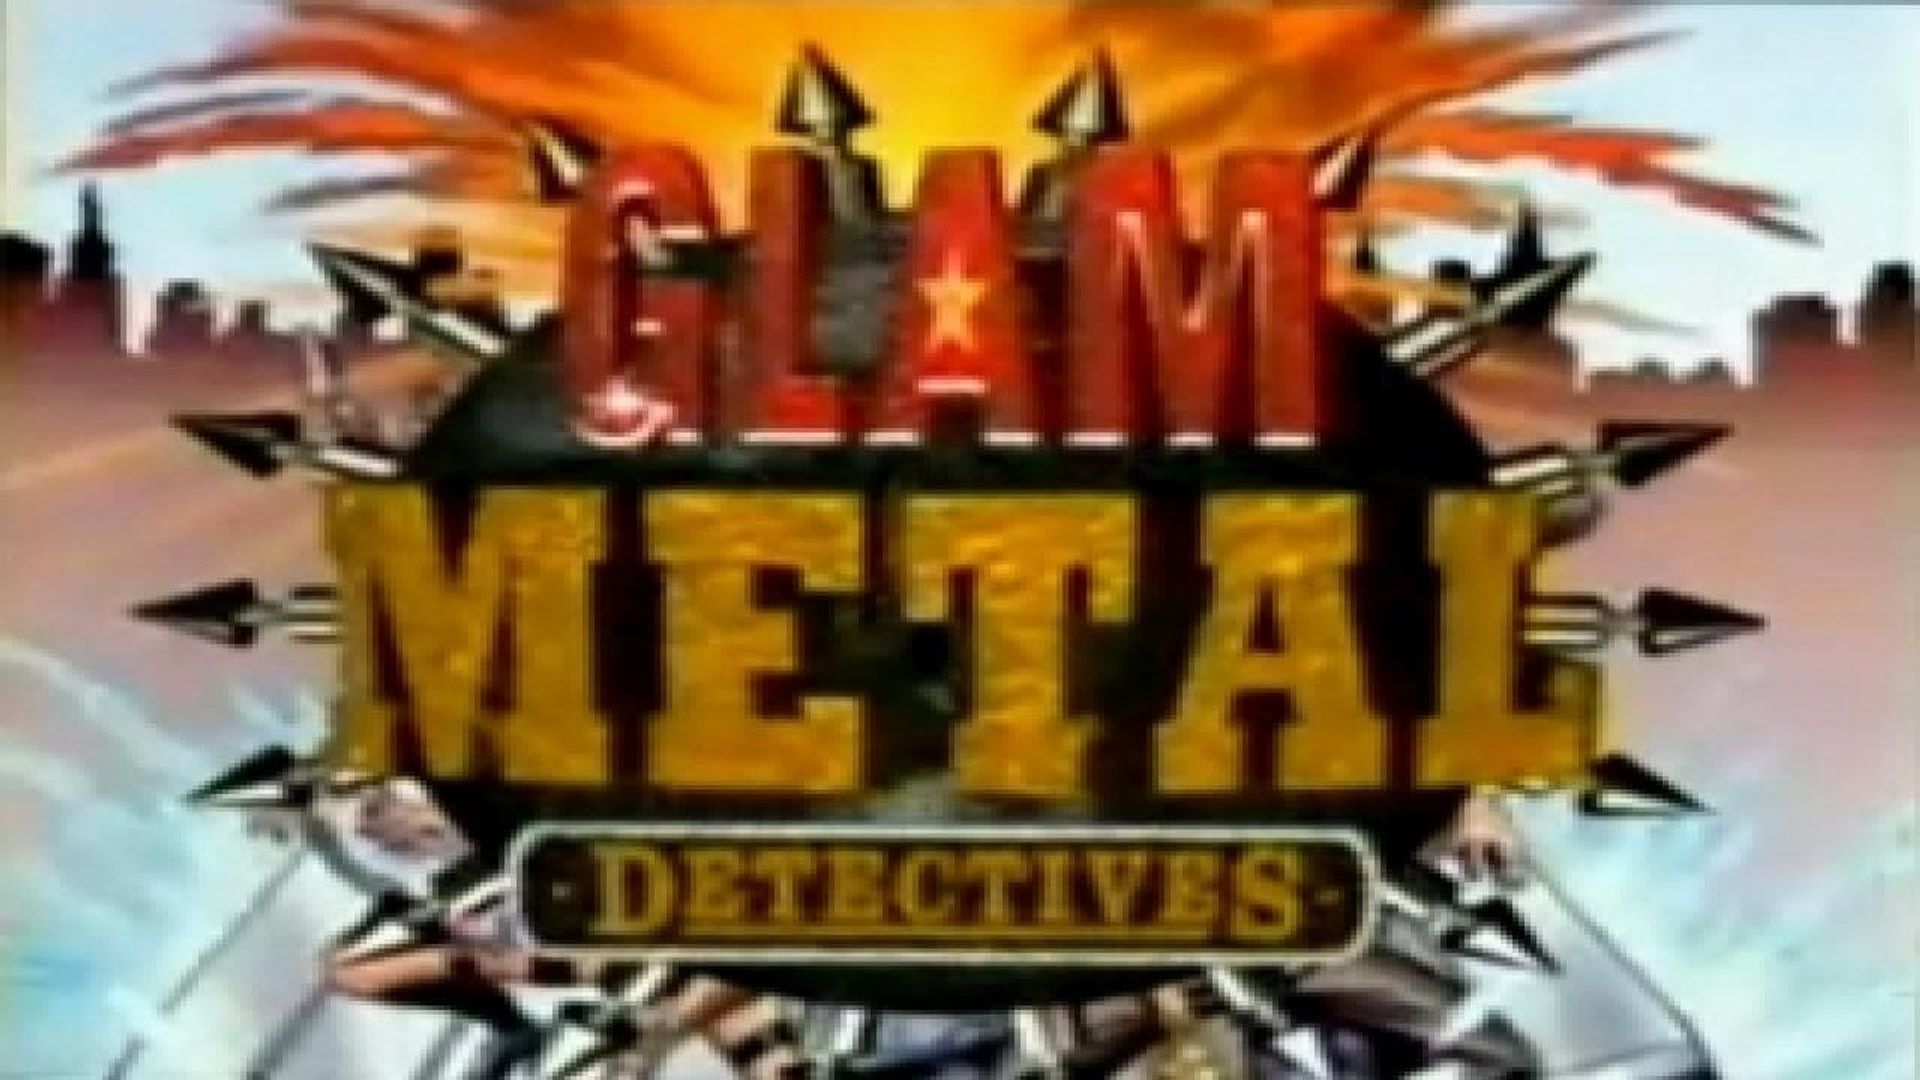 The Glam Metal Detectives background